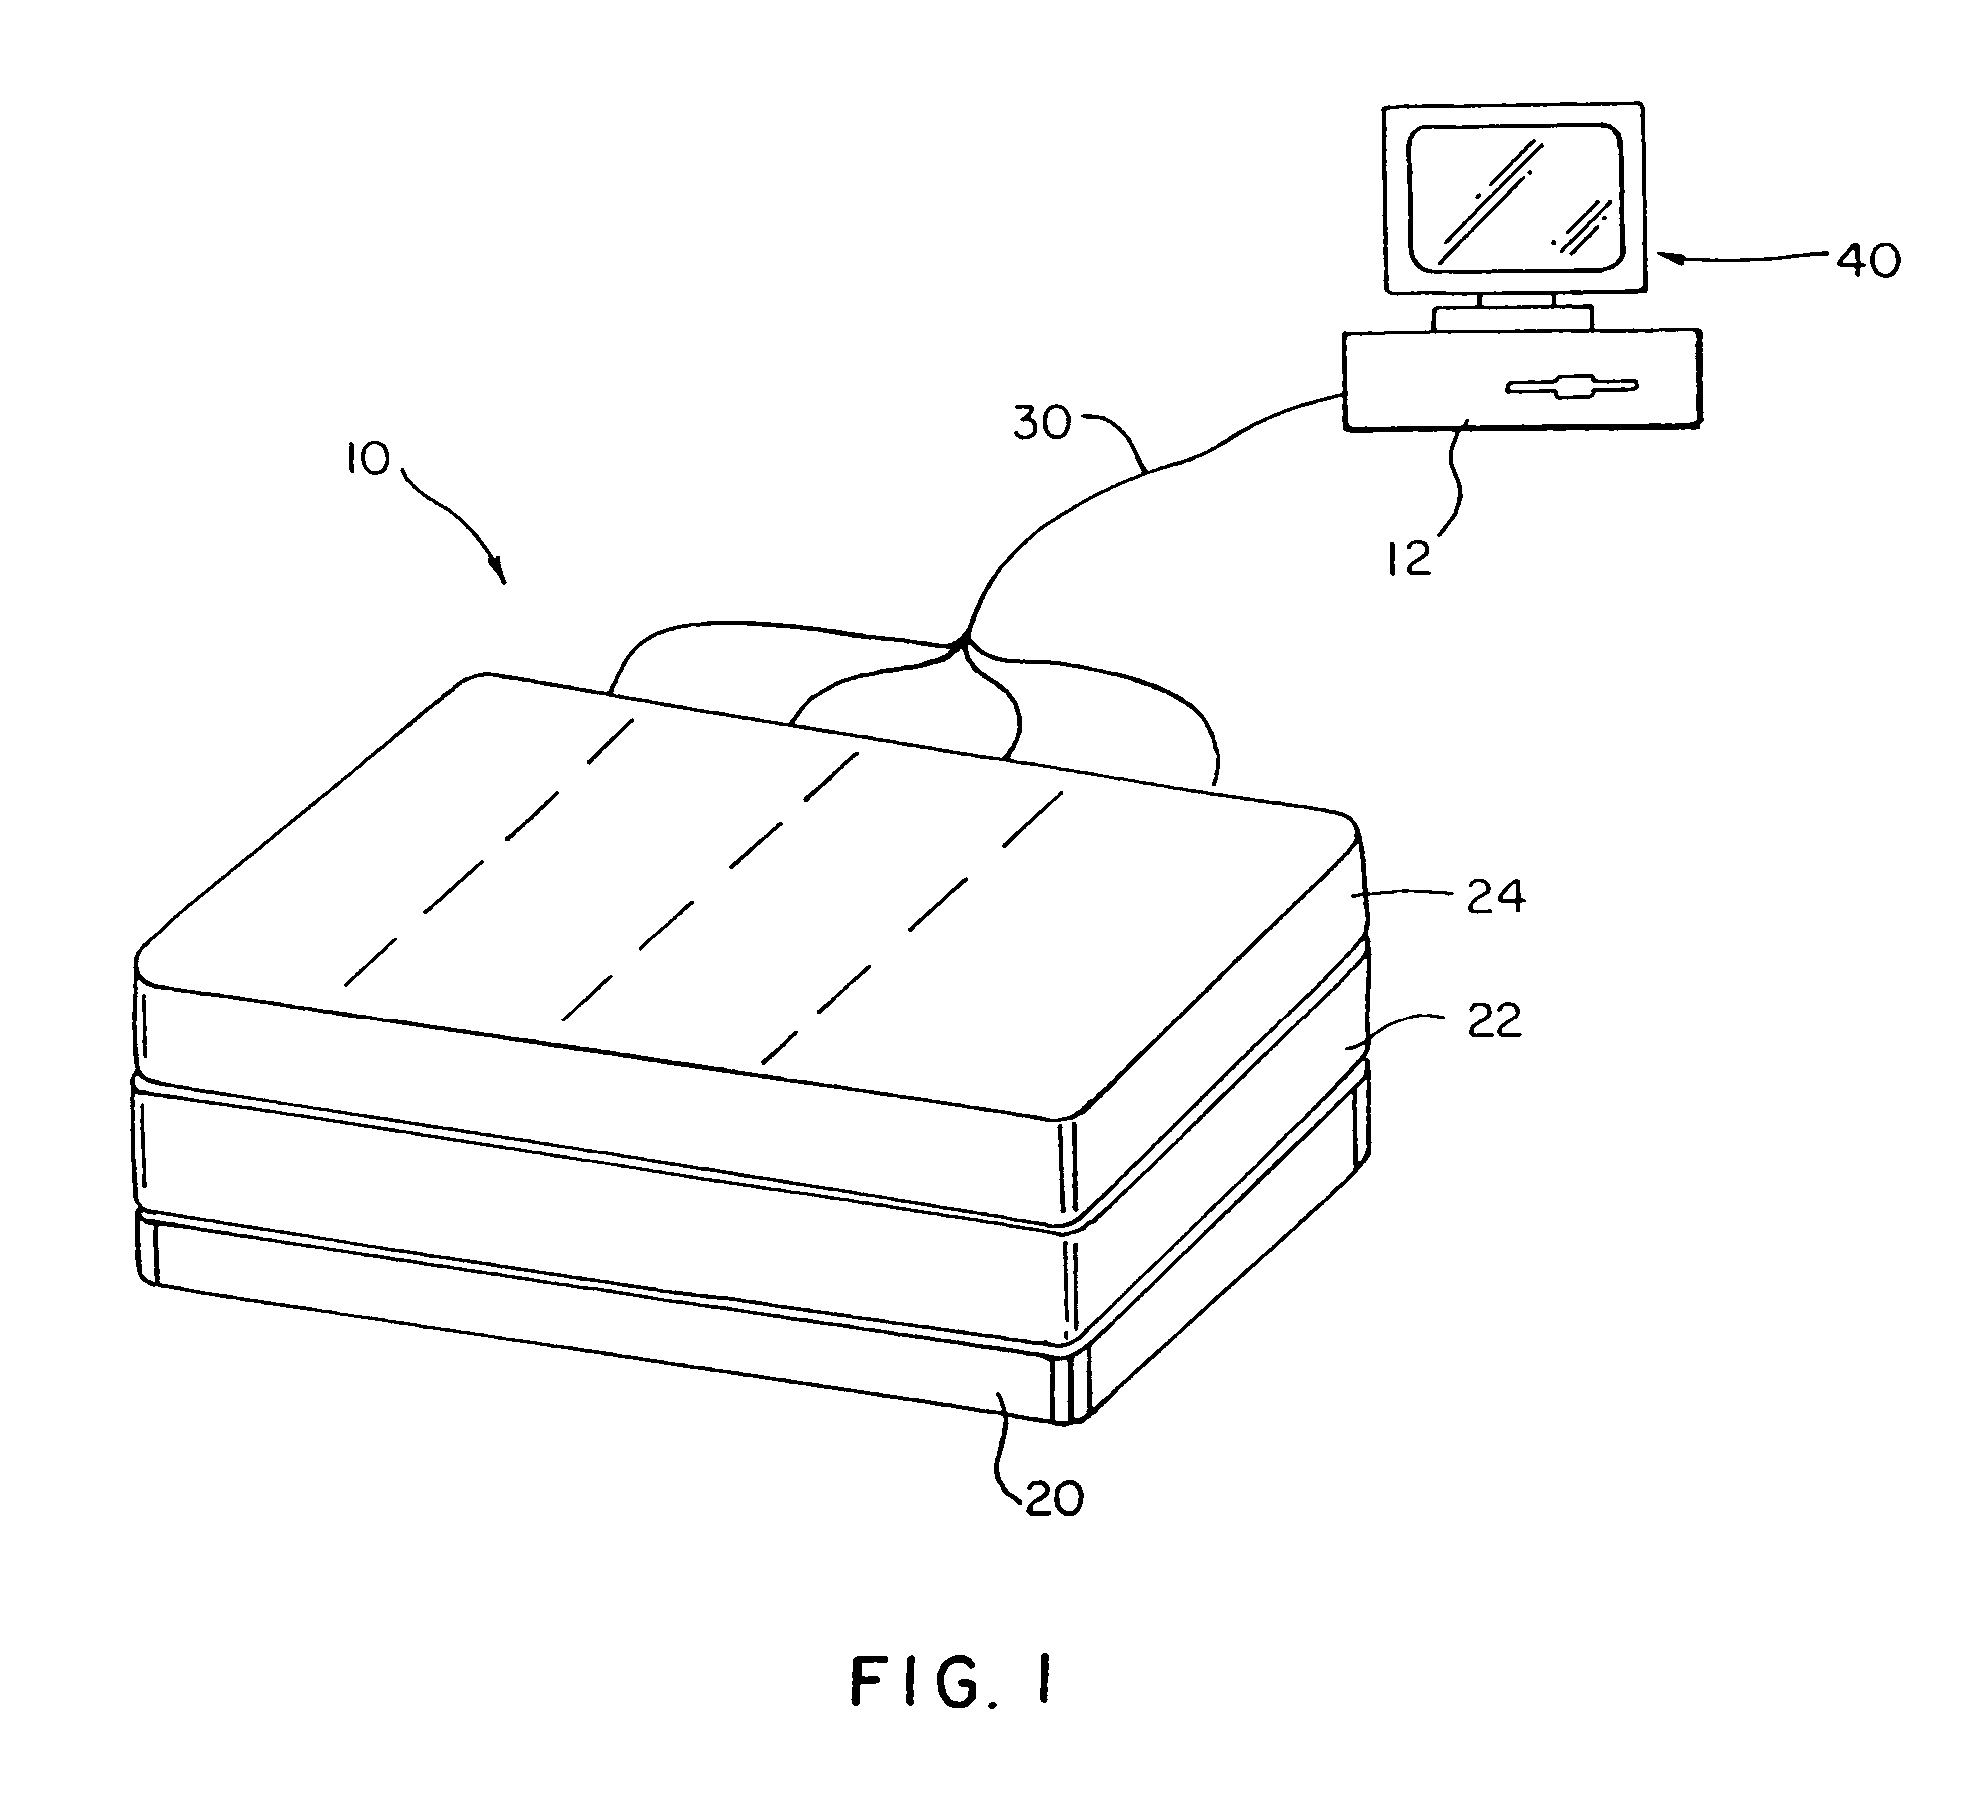 Automatic mattress selection system